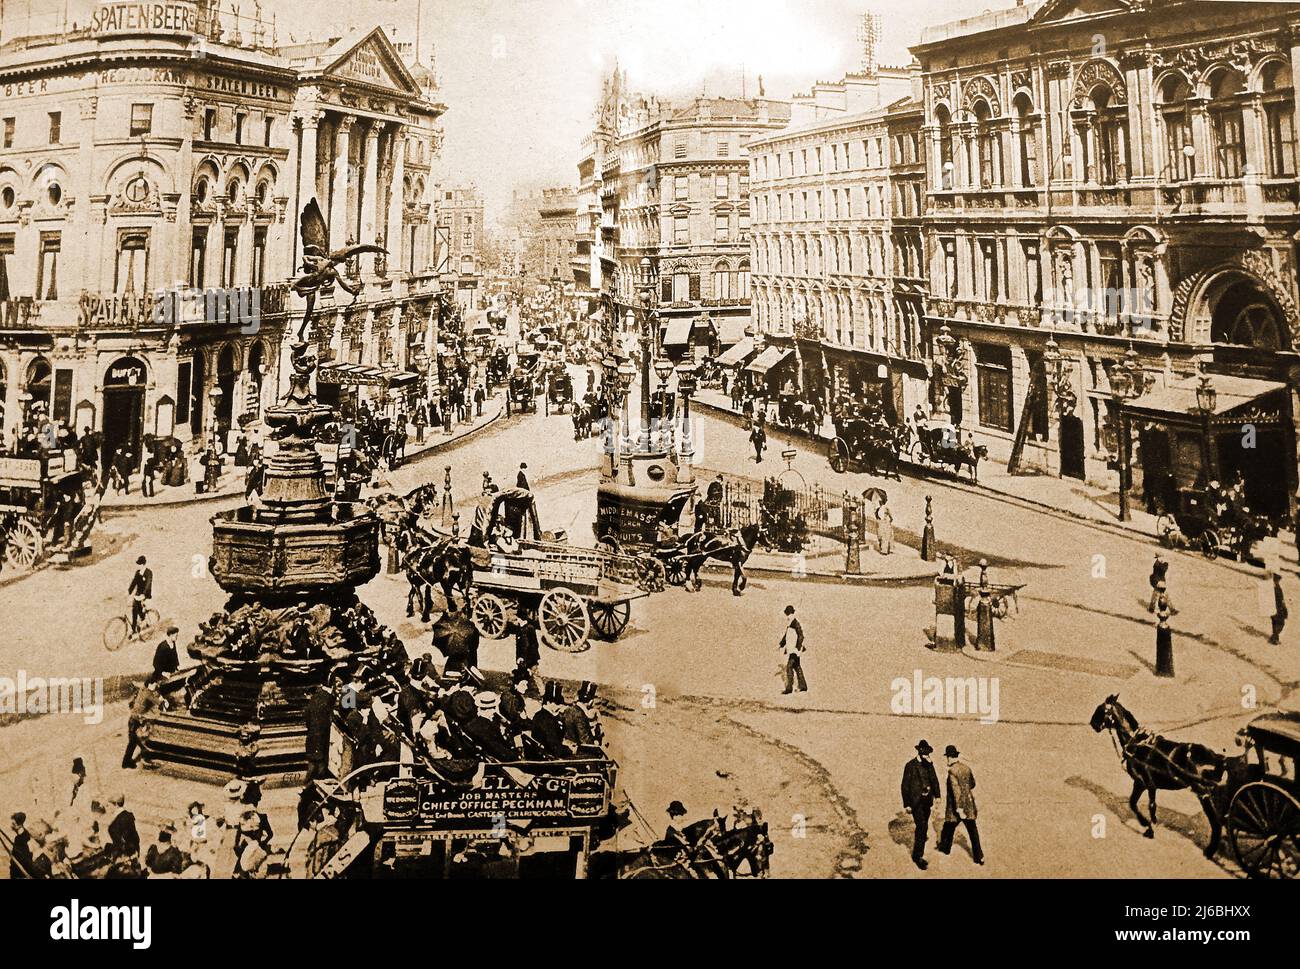 An old photograph of Piccadilly circus, London in the days before motor transport. Stock Photo